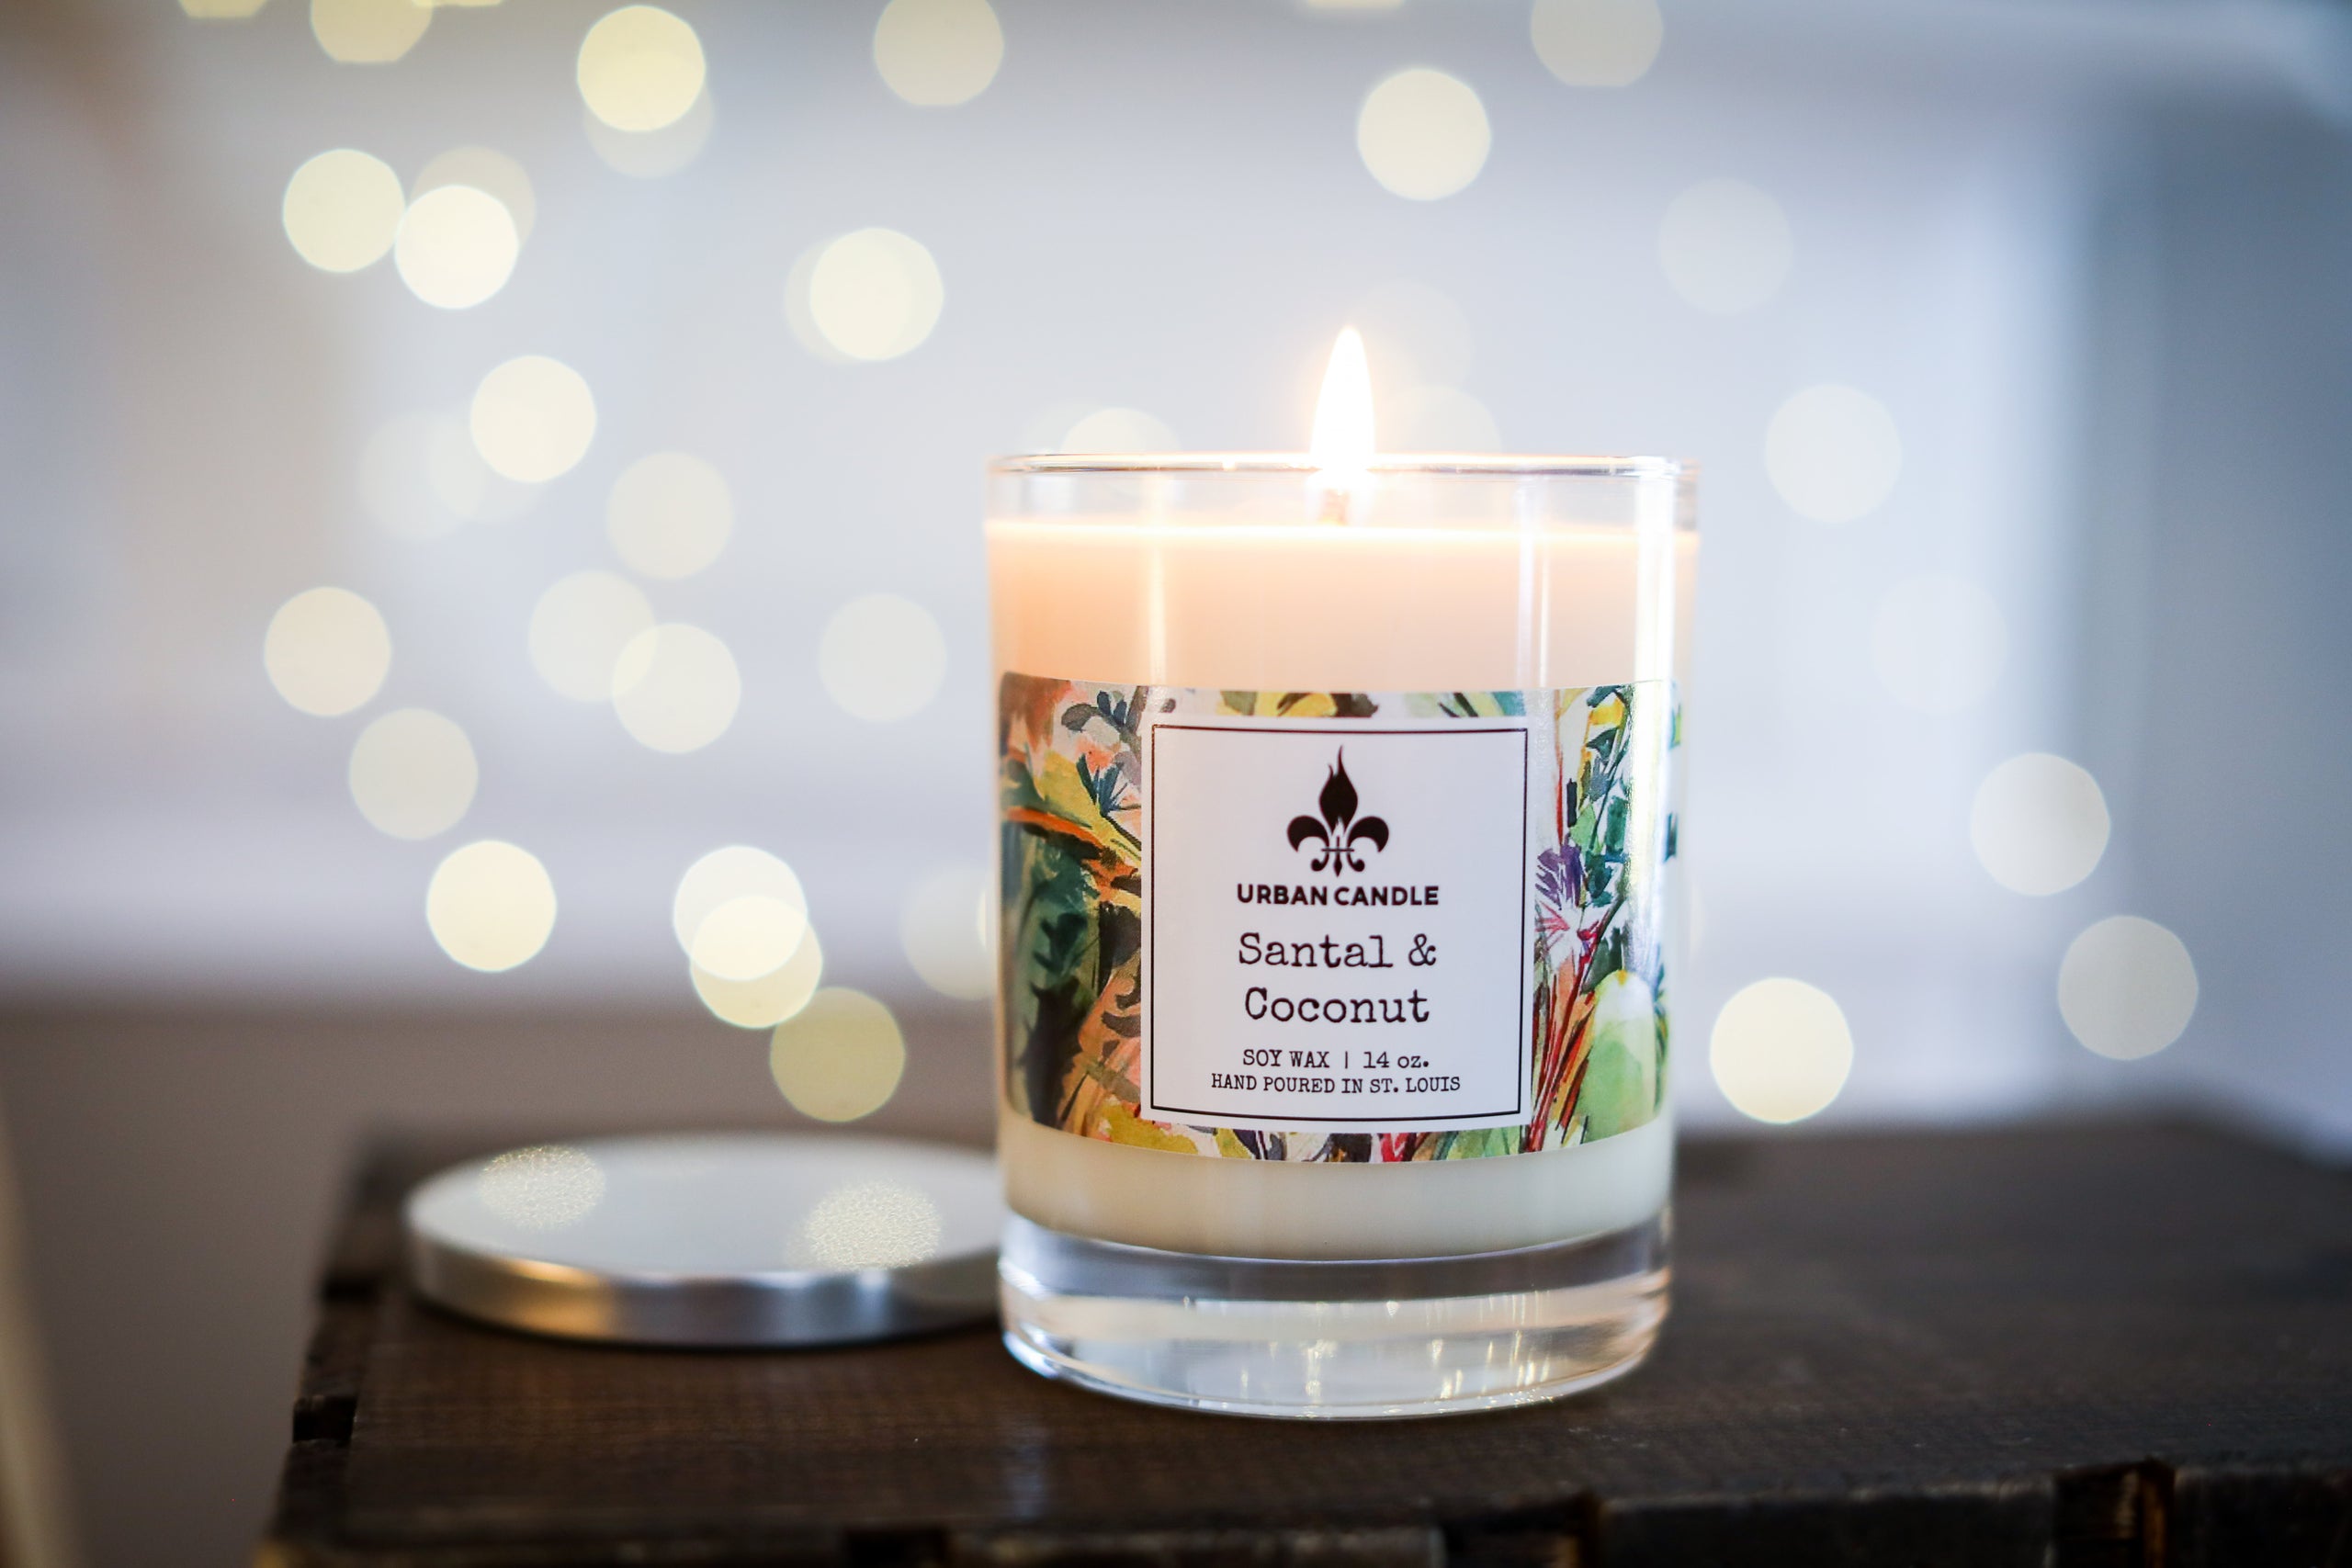 Candle Sand – Local Accent